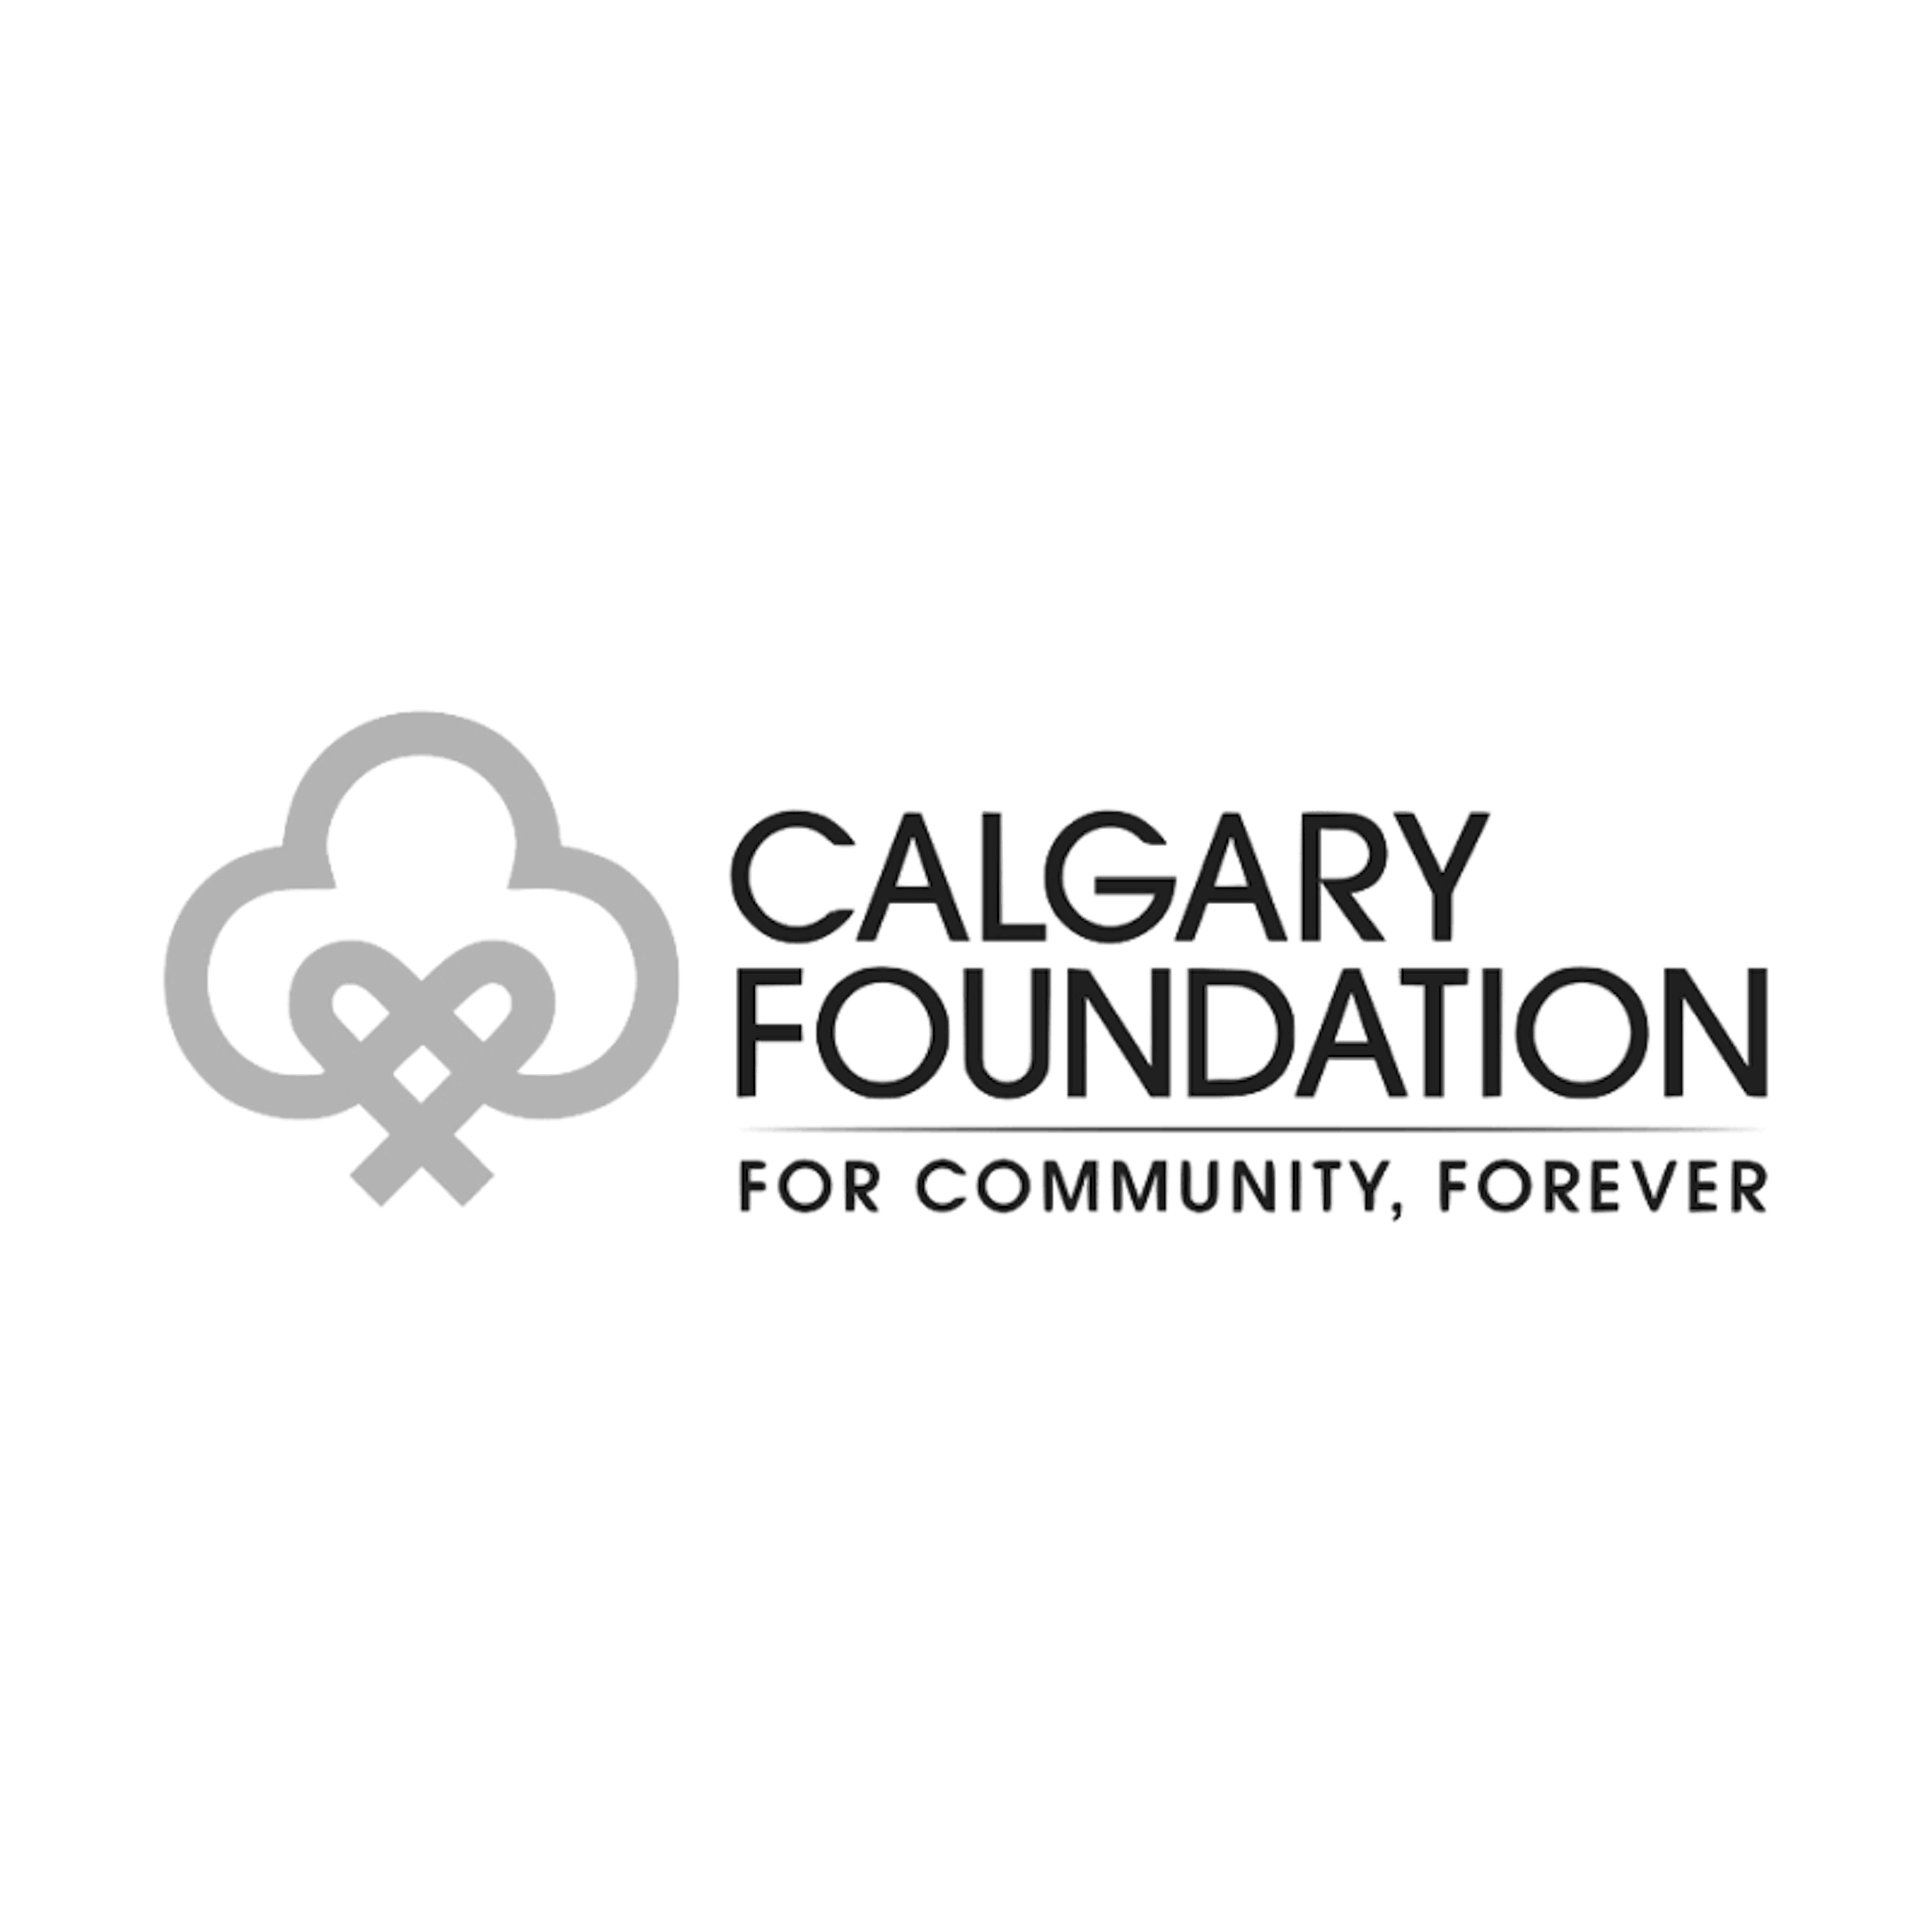 Calgary Foundation for Community Forever logo in grayscale